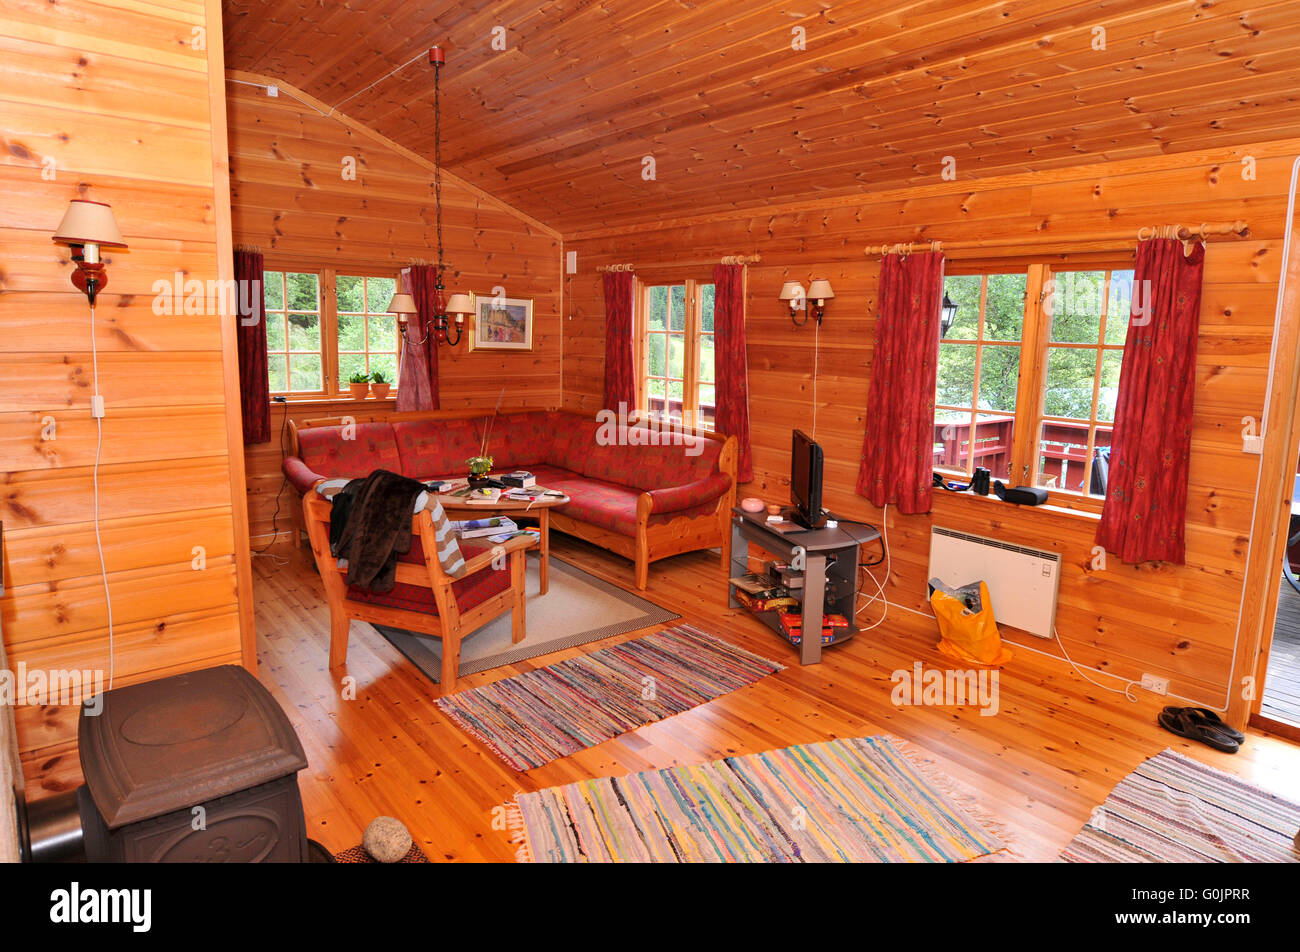 Wooden hut, cottage, holliday chalet, cabin, Norway Stock Photo